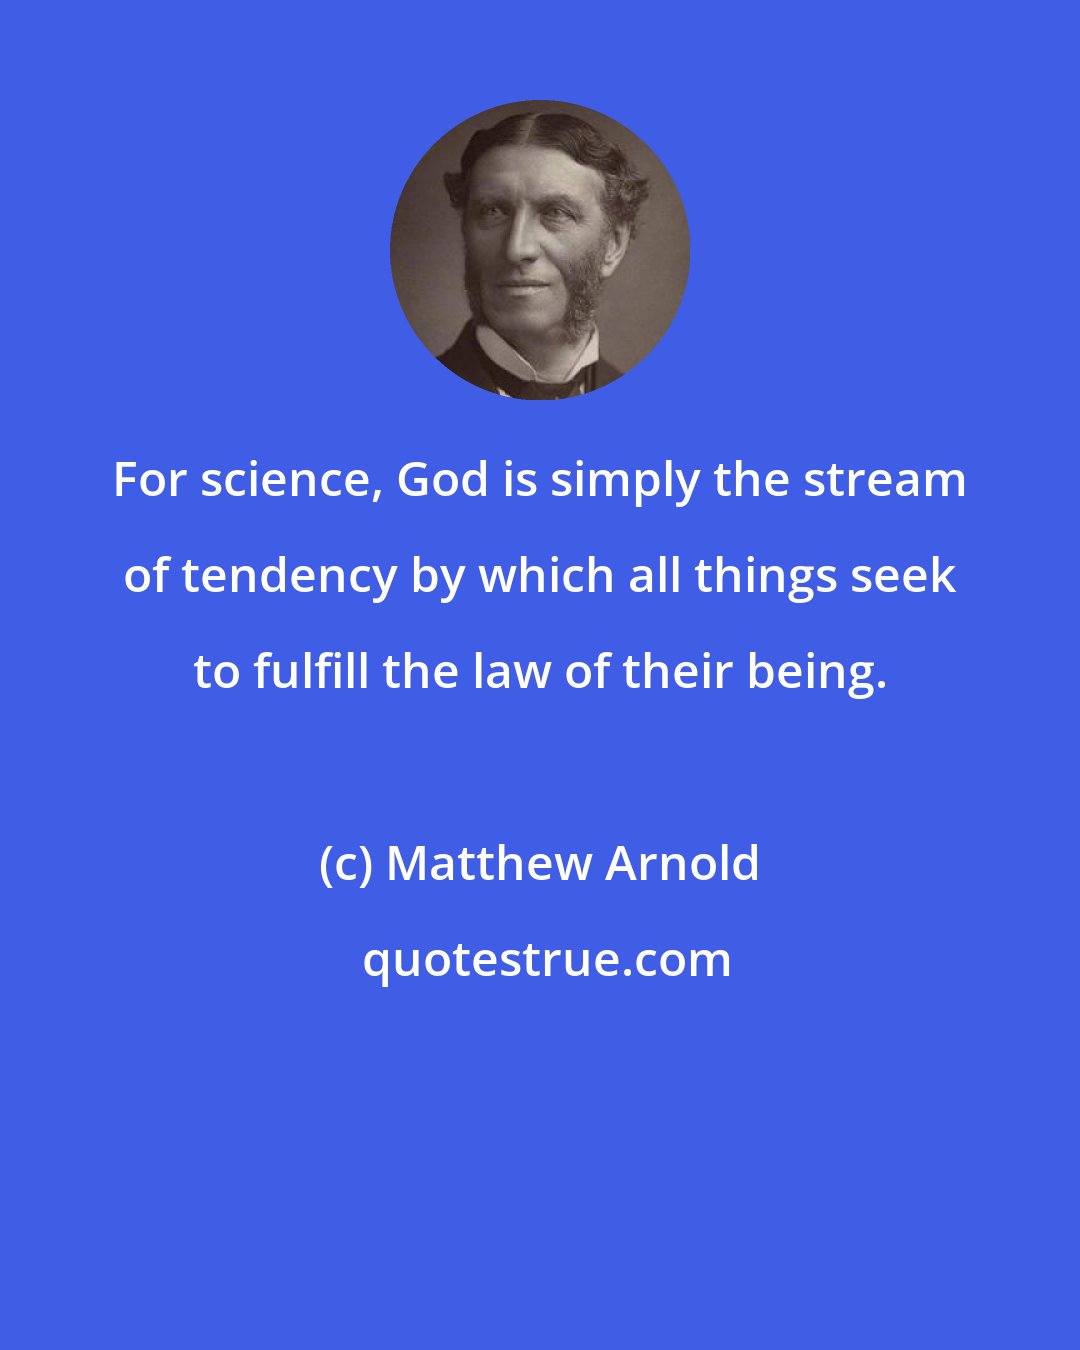 Matthew Arnold: For science, God is simply the stream of tendency by which all things seek to fulfill the law of their being.